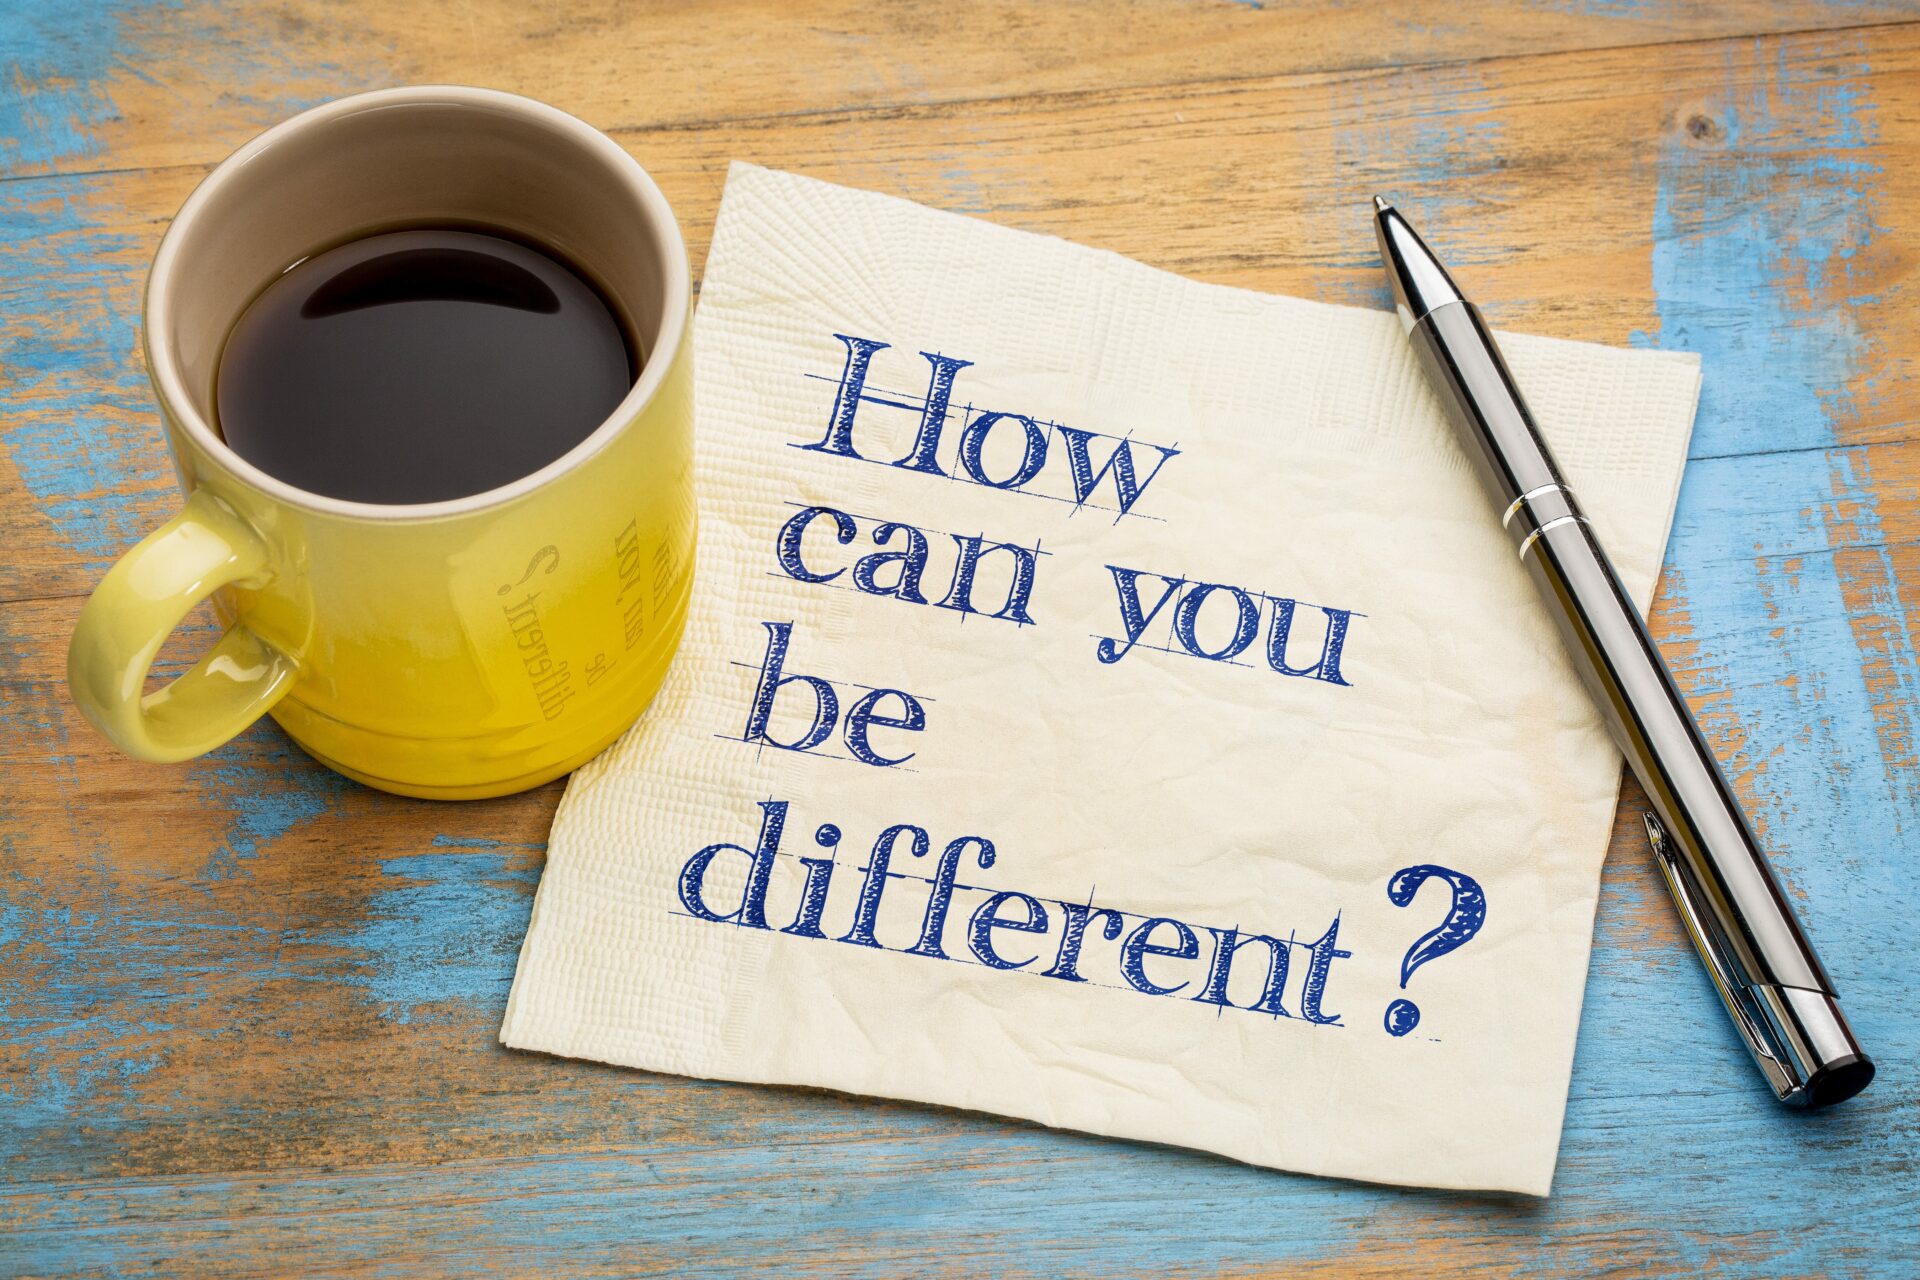 Branding question “How can you be different?” written on a napkin with a yellow mug of espresso coffee